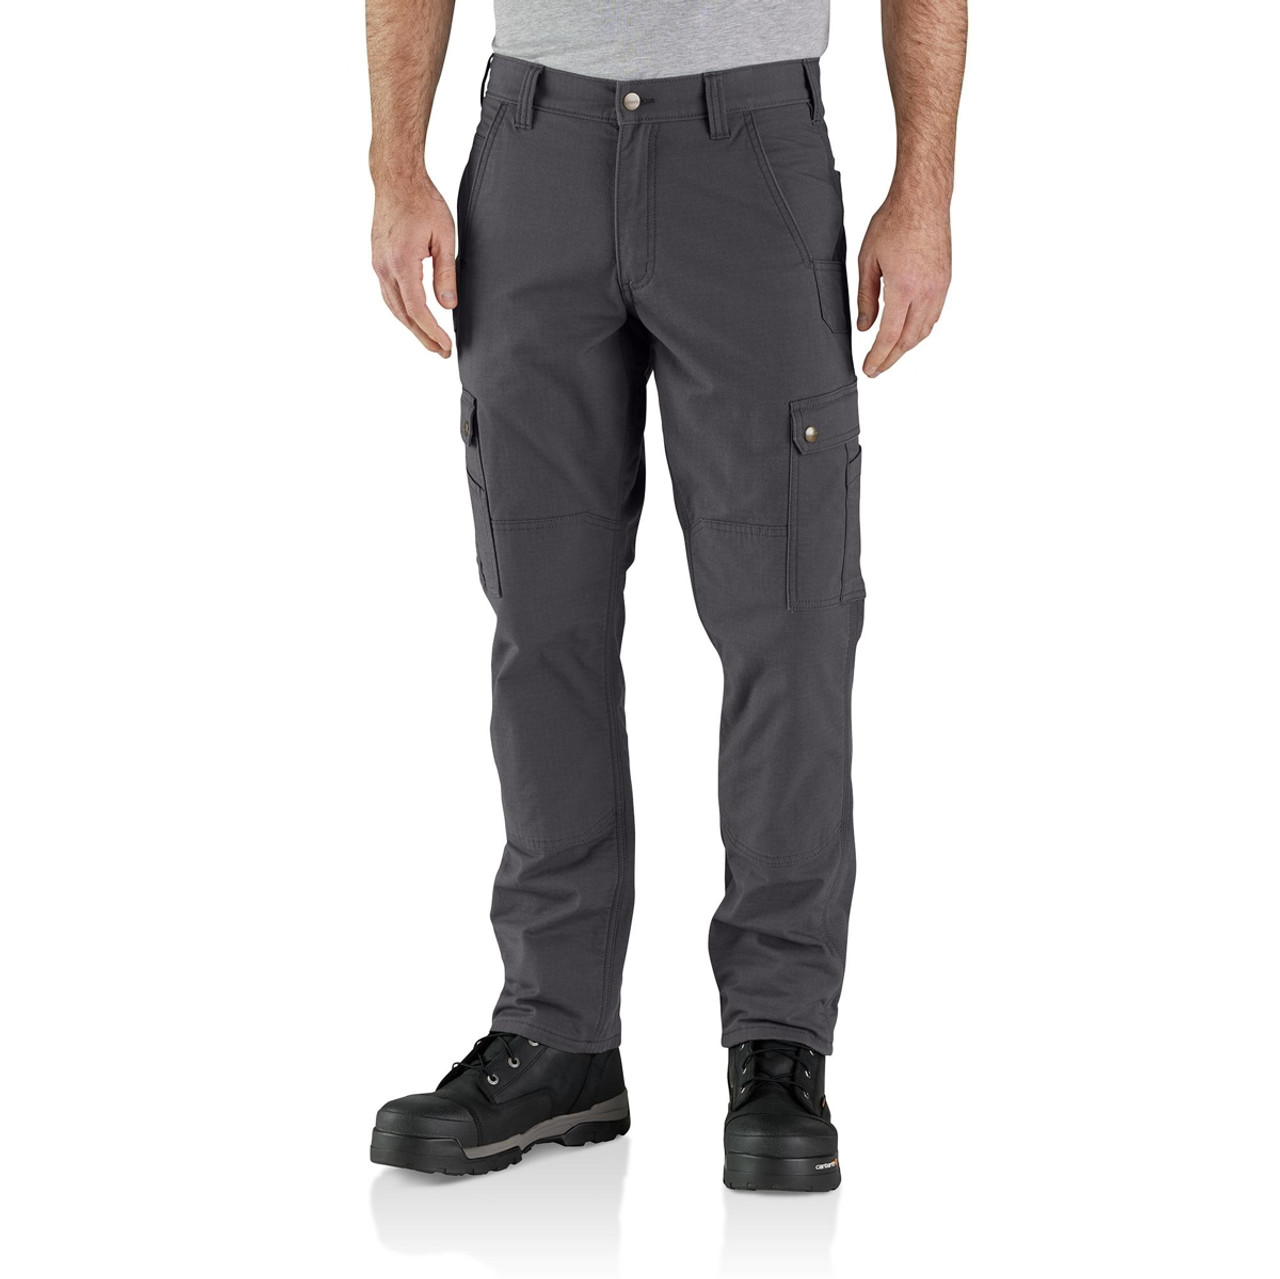 Men's Cargo Work Pant - Relaxed Fit - Rugged Flex® - Canvas, Coming Soon